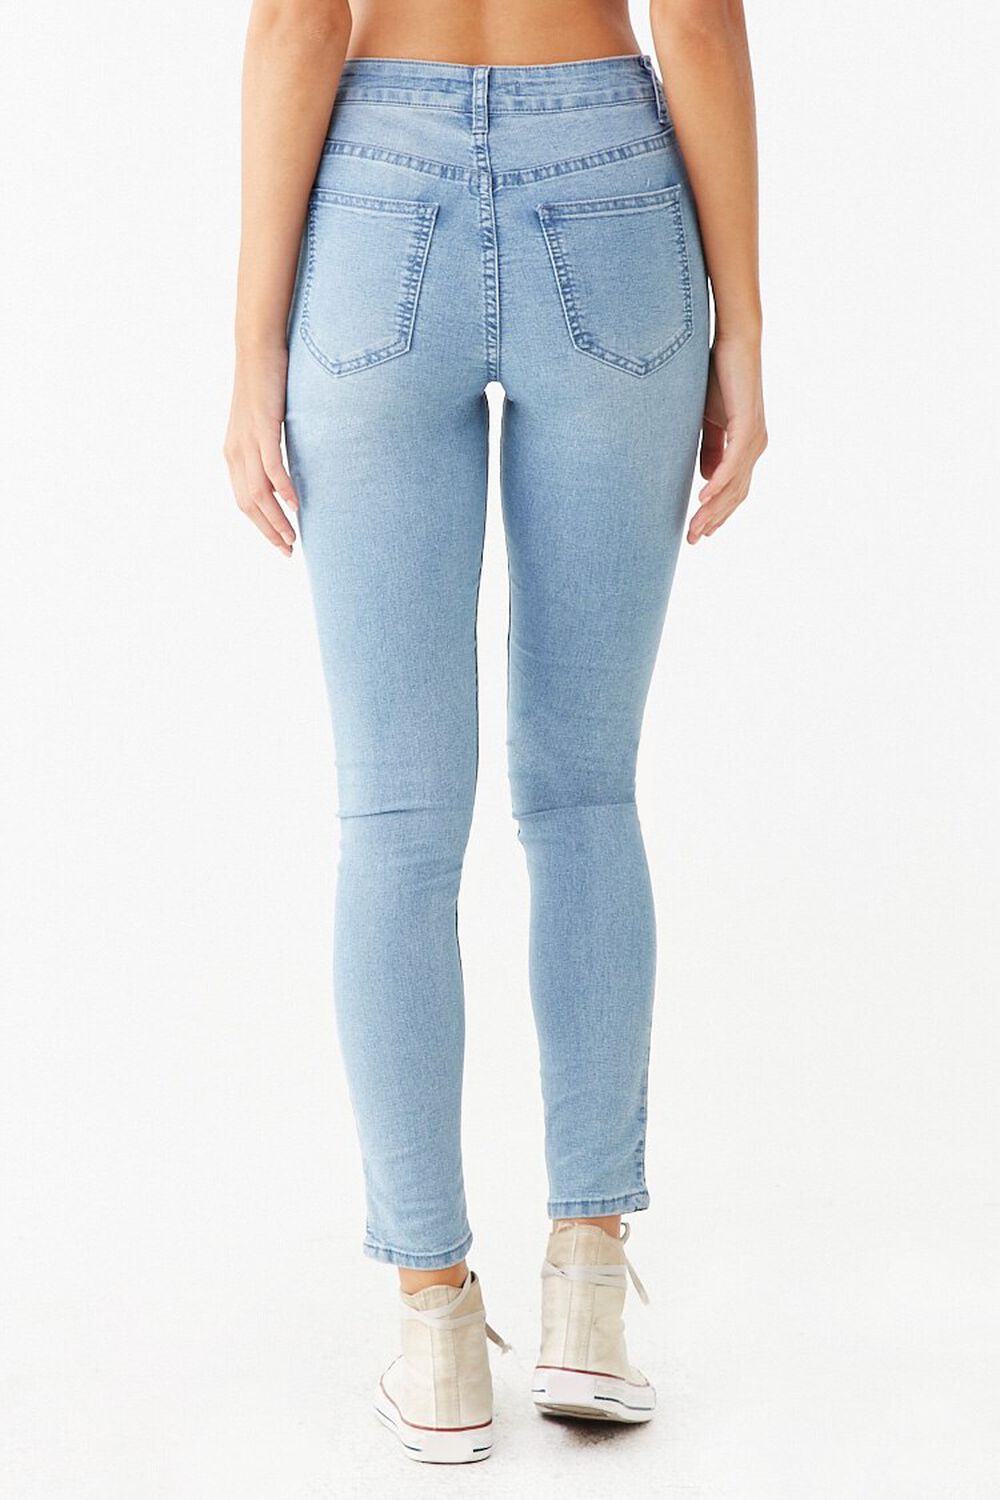 Mid-Rise Skinny Jeans, image 3